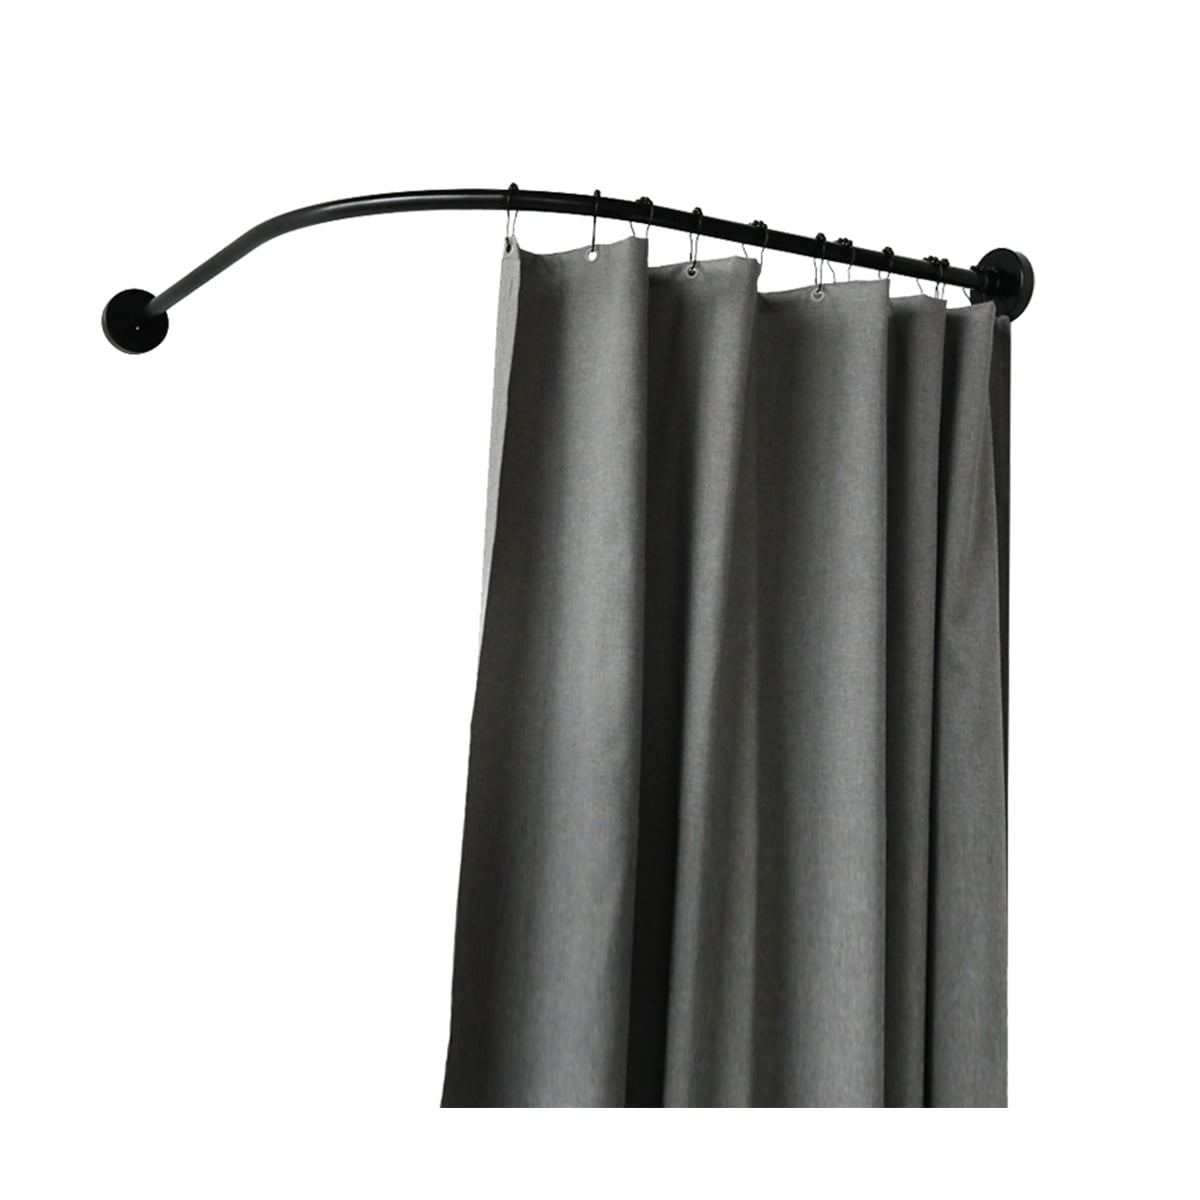 304 Stainless Steel Composite Pipe, Black Iron Pipe Shower Curtain Rod